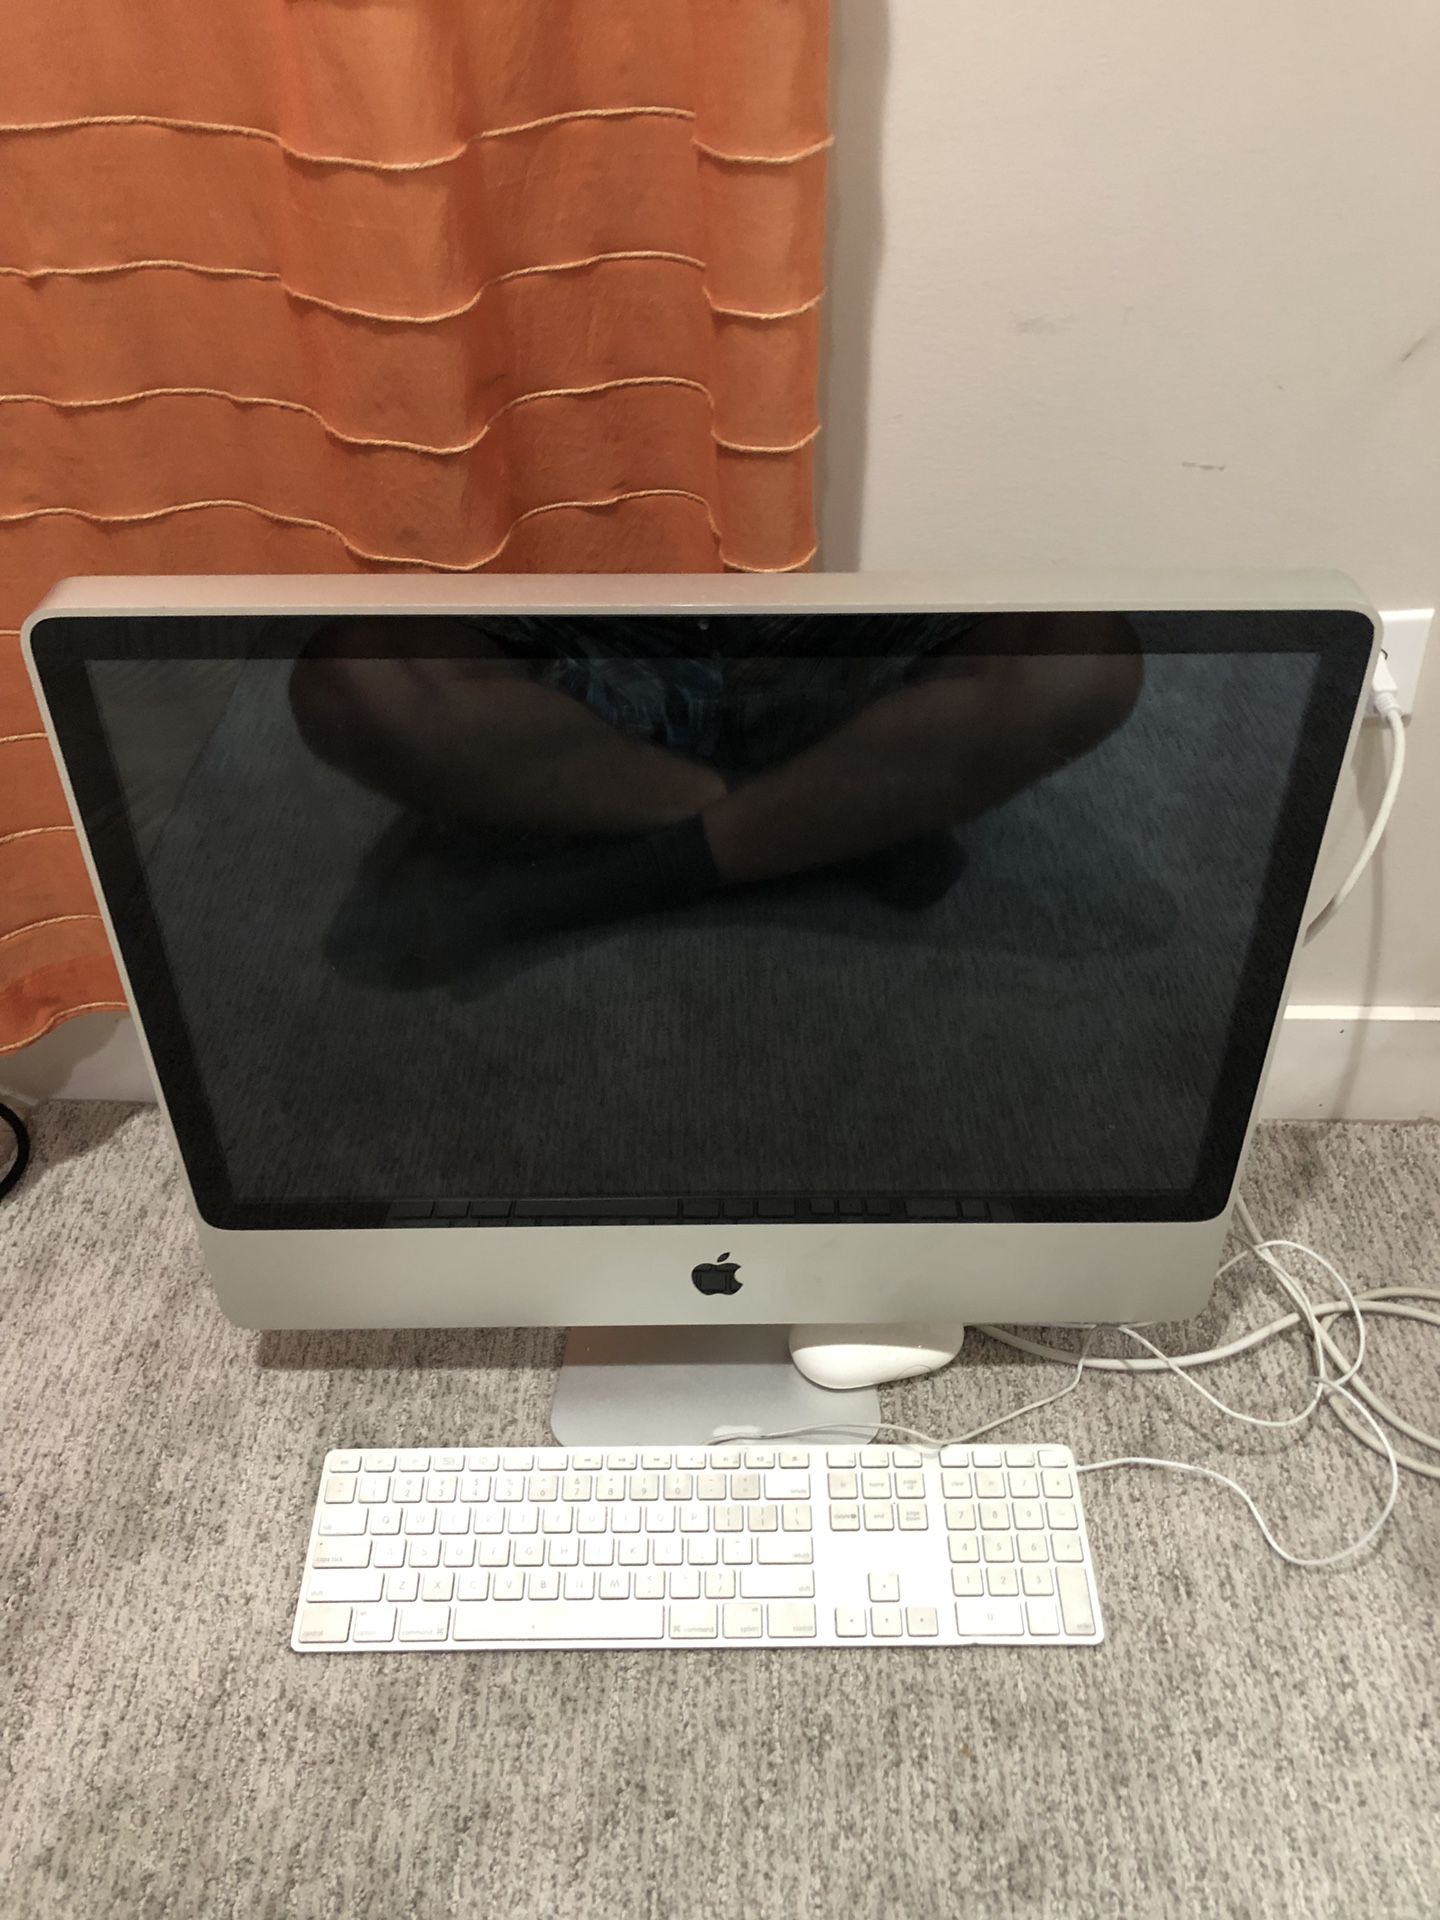 Apple imac 25 inch good condition!! MS Word 2011